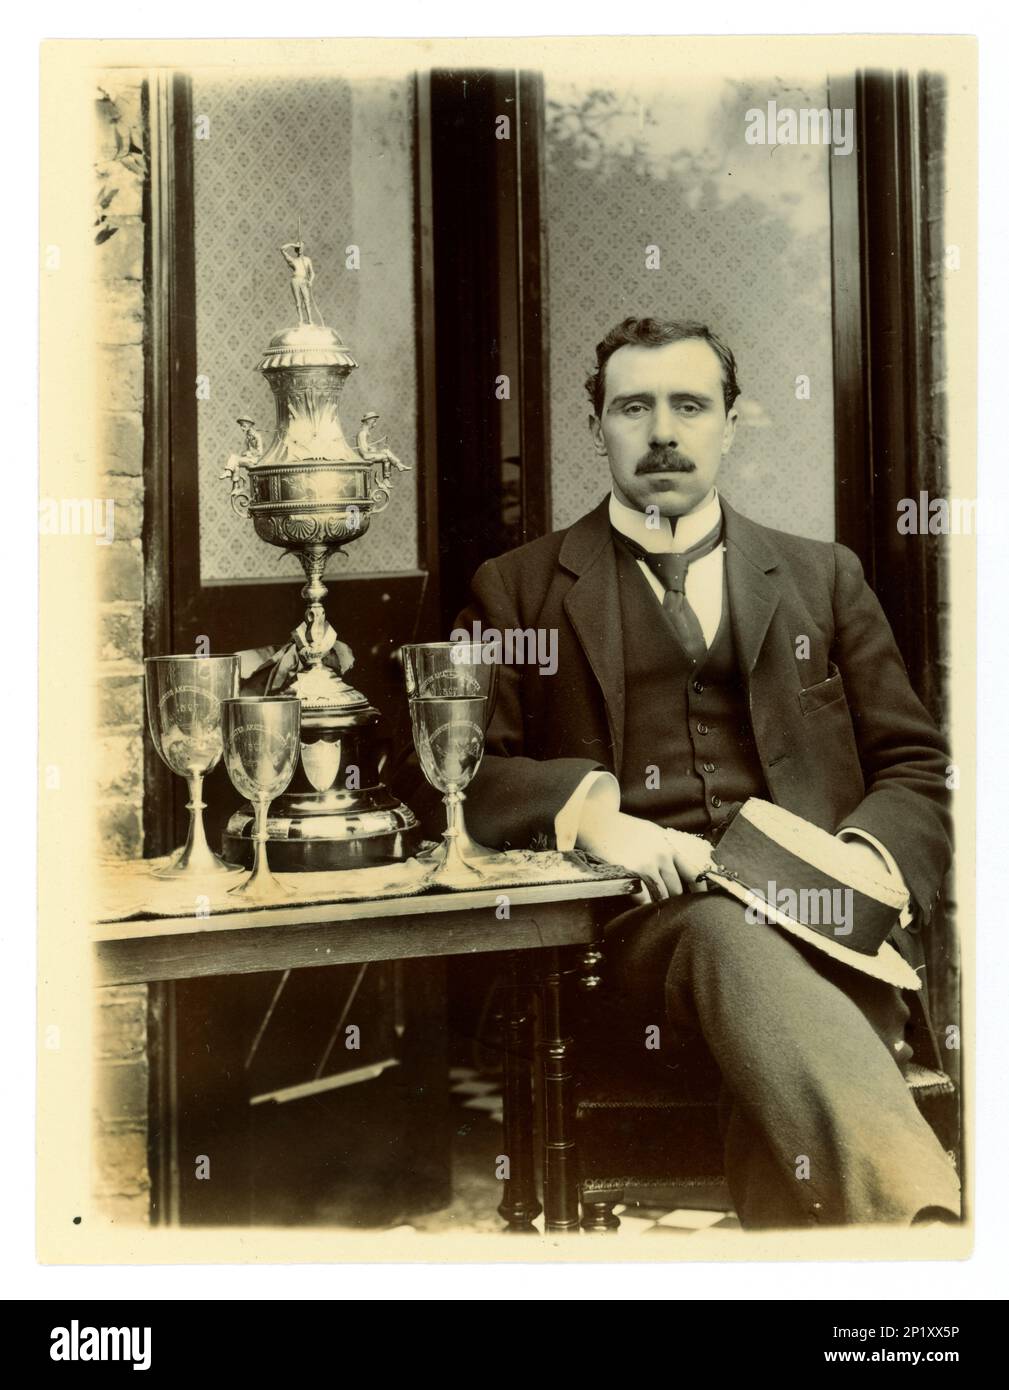 Original Victorian photograph of gent, holding a boater. Next to him on a table there is displayed a large Worcester challenge vase, / regatta trophy for rowing, and other cups,  Possibly member of a coxed four crew. Worcester area, U.K.  circa 1897-1899 Stock Photo